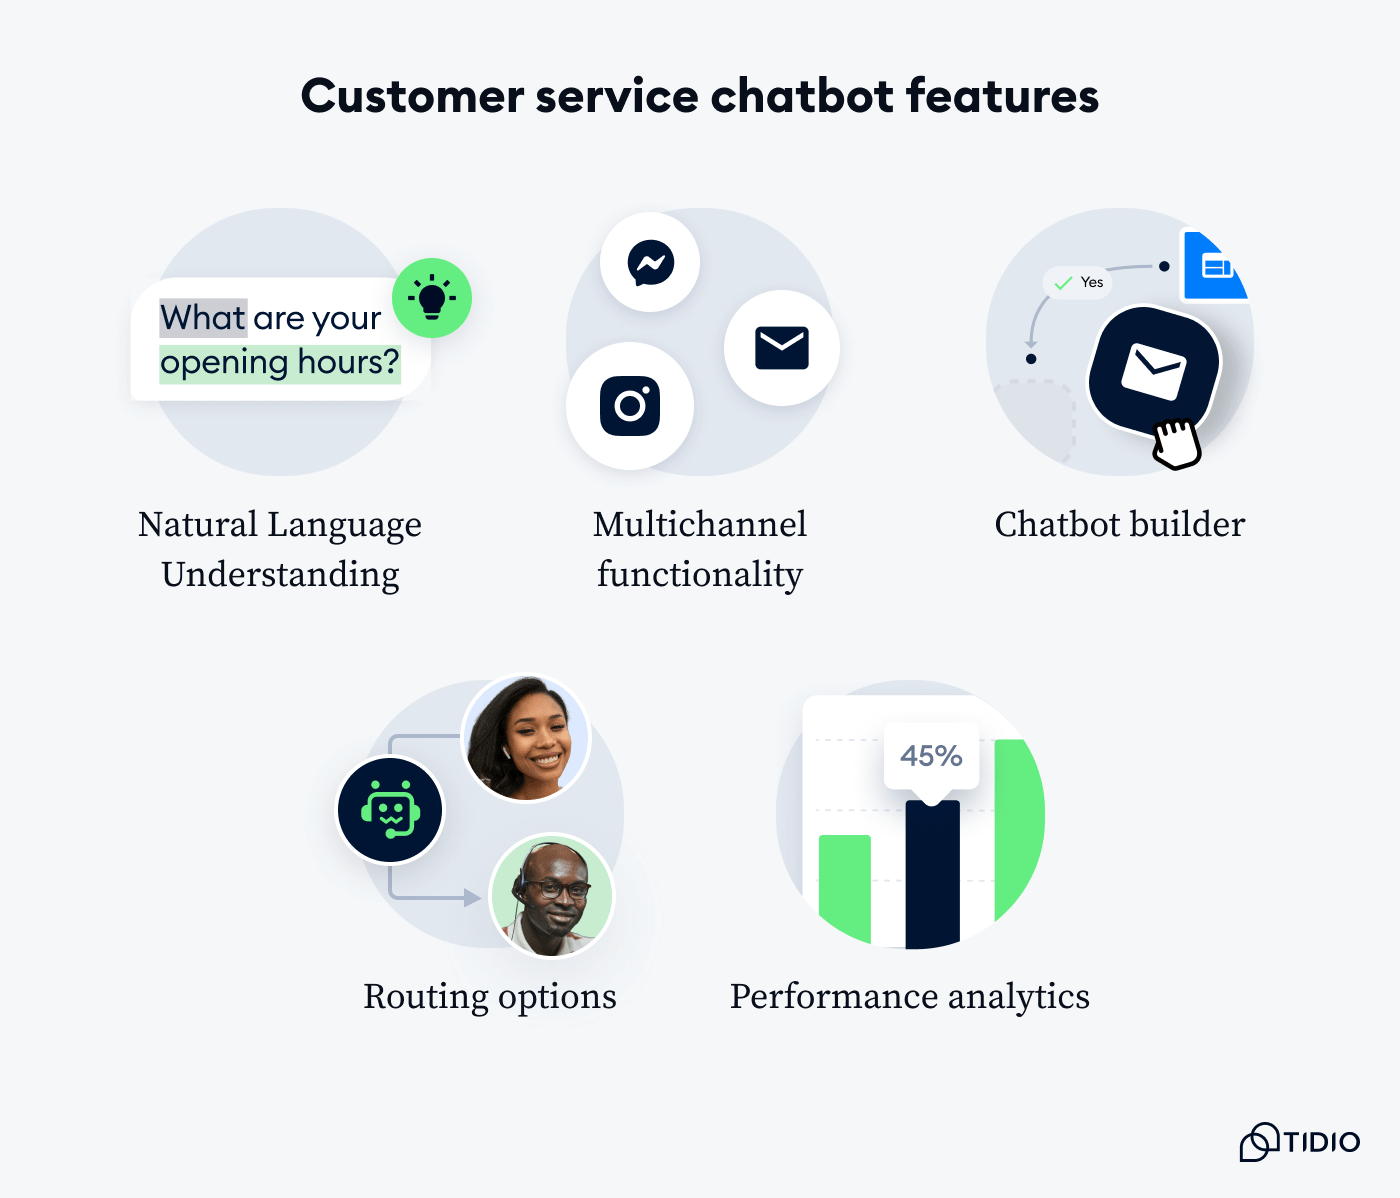 Customer service chatbot features